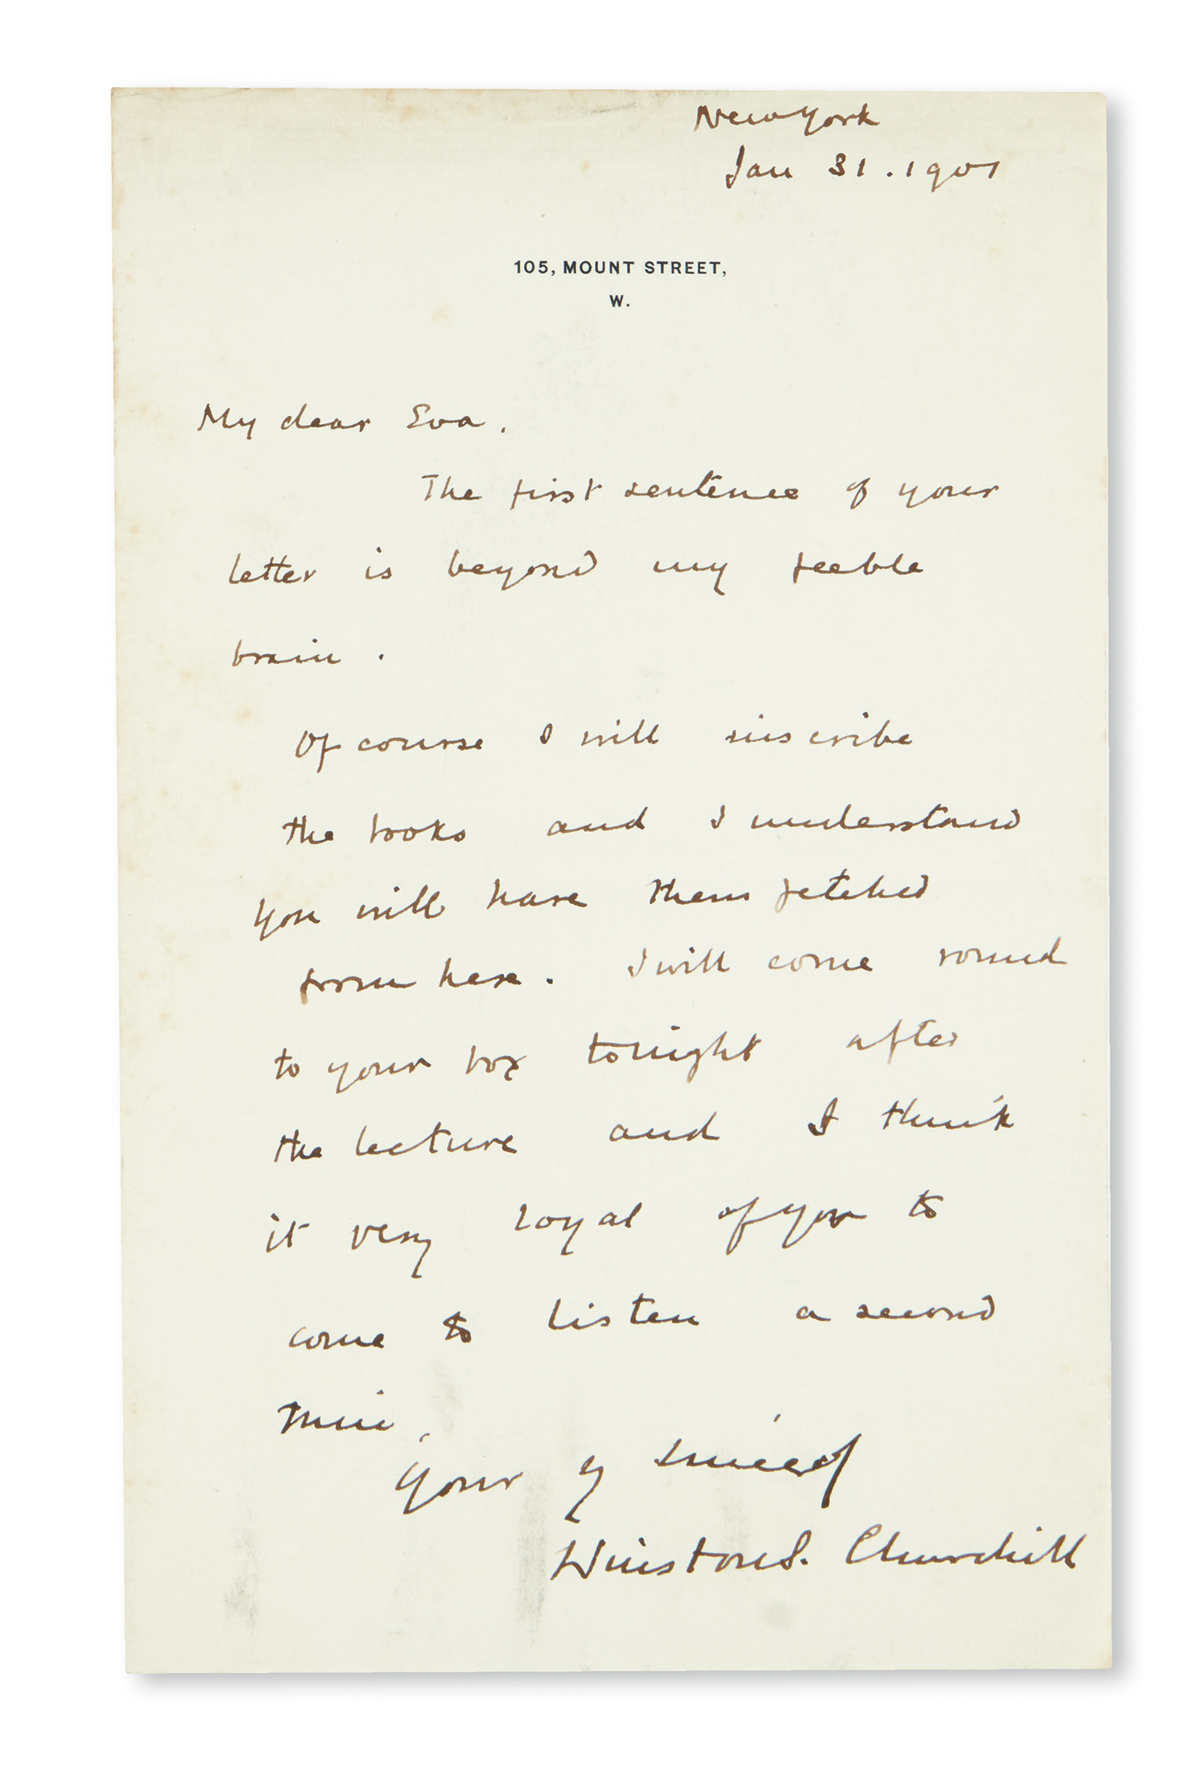 CHURCHILL, WINSTON S. Two items: Autograph Letter Signed * Churchill. The River War. Signed and Inscribed, only volume 2 present.